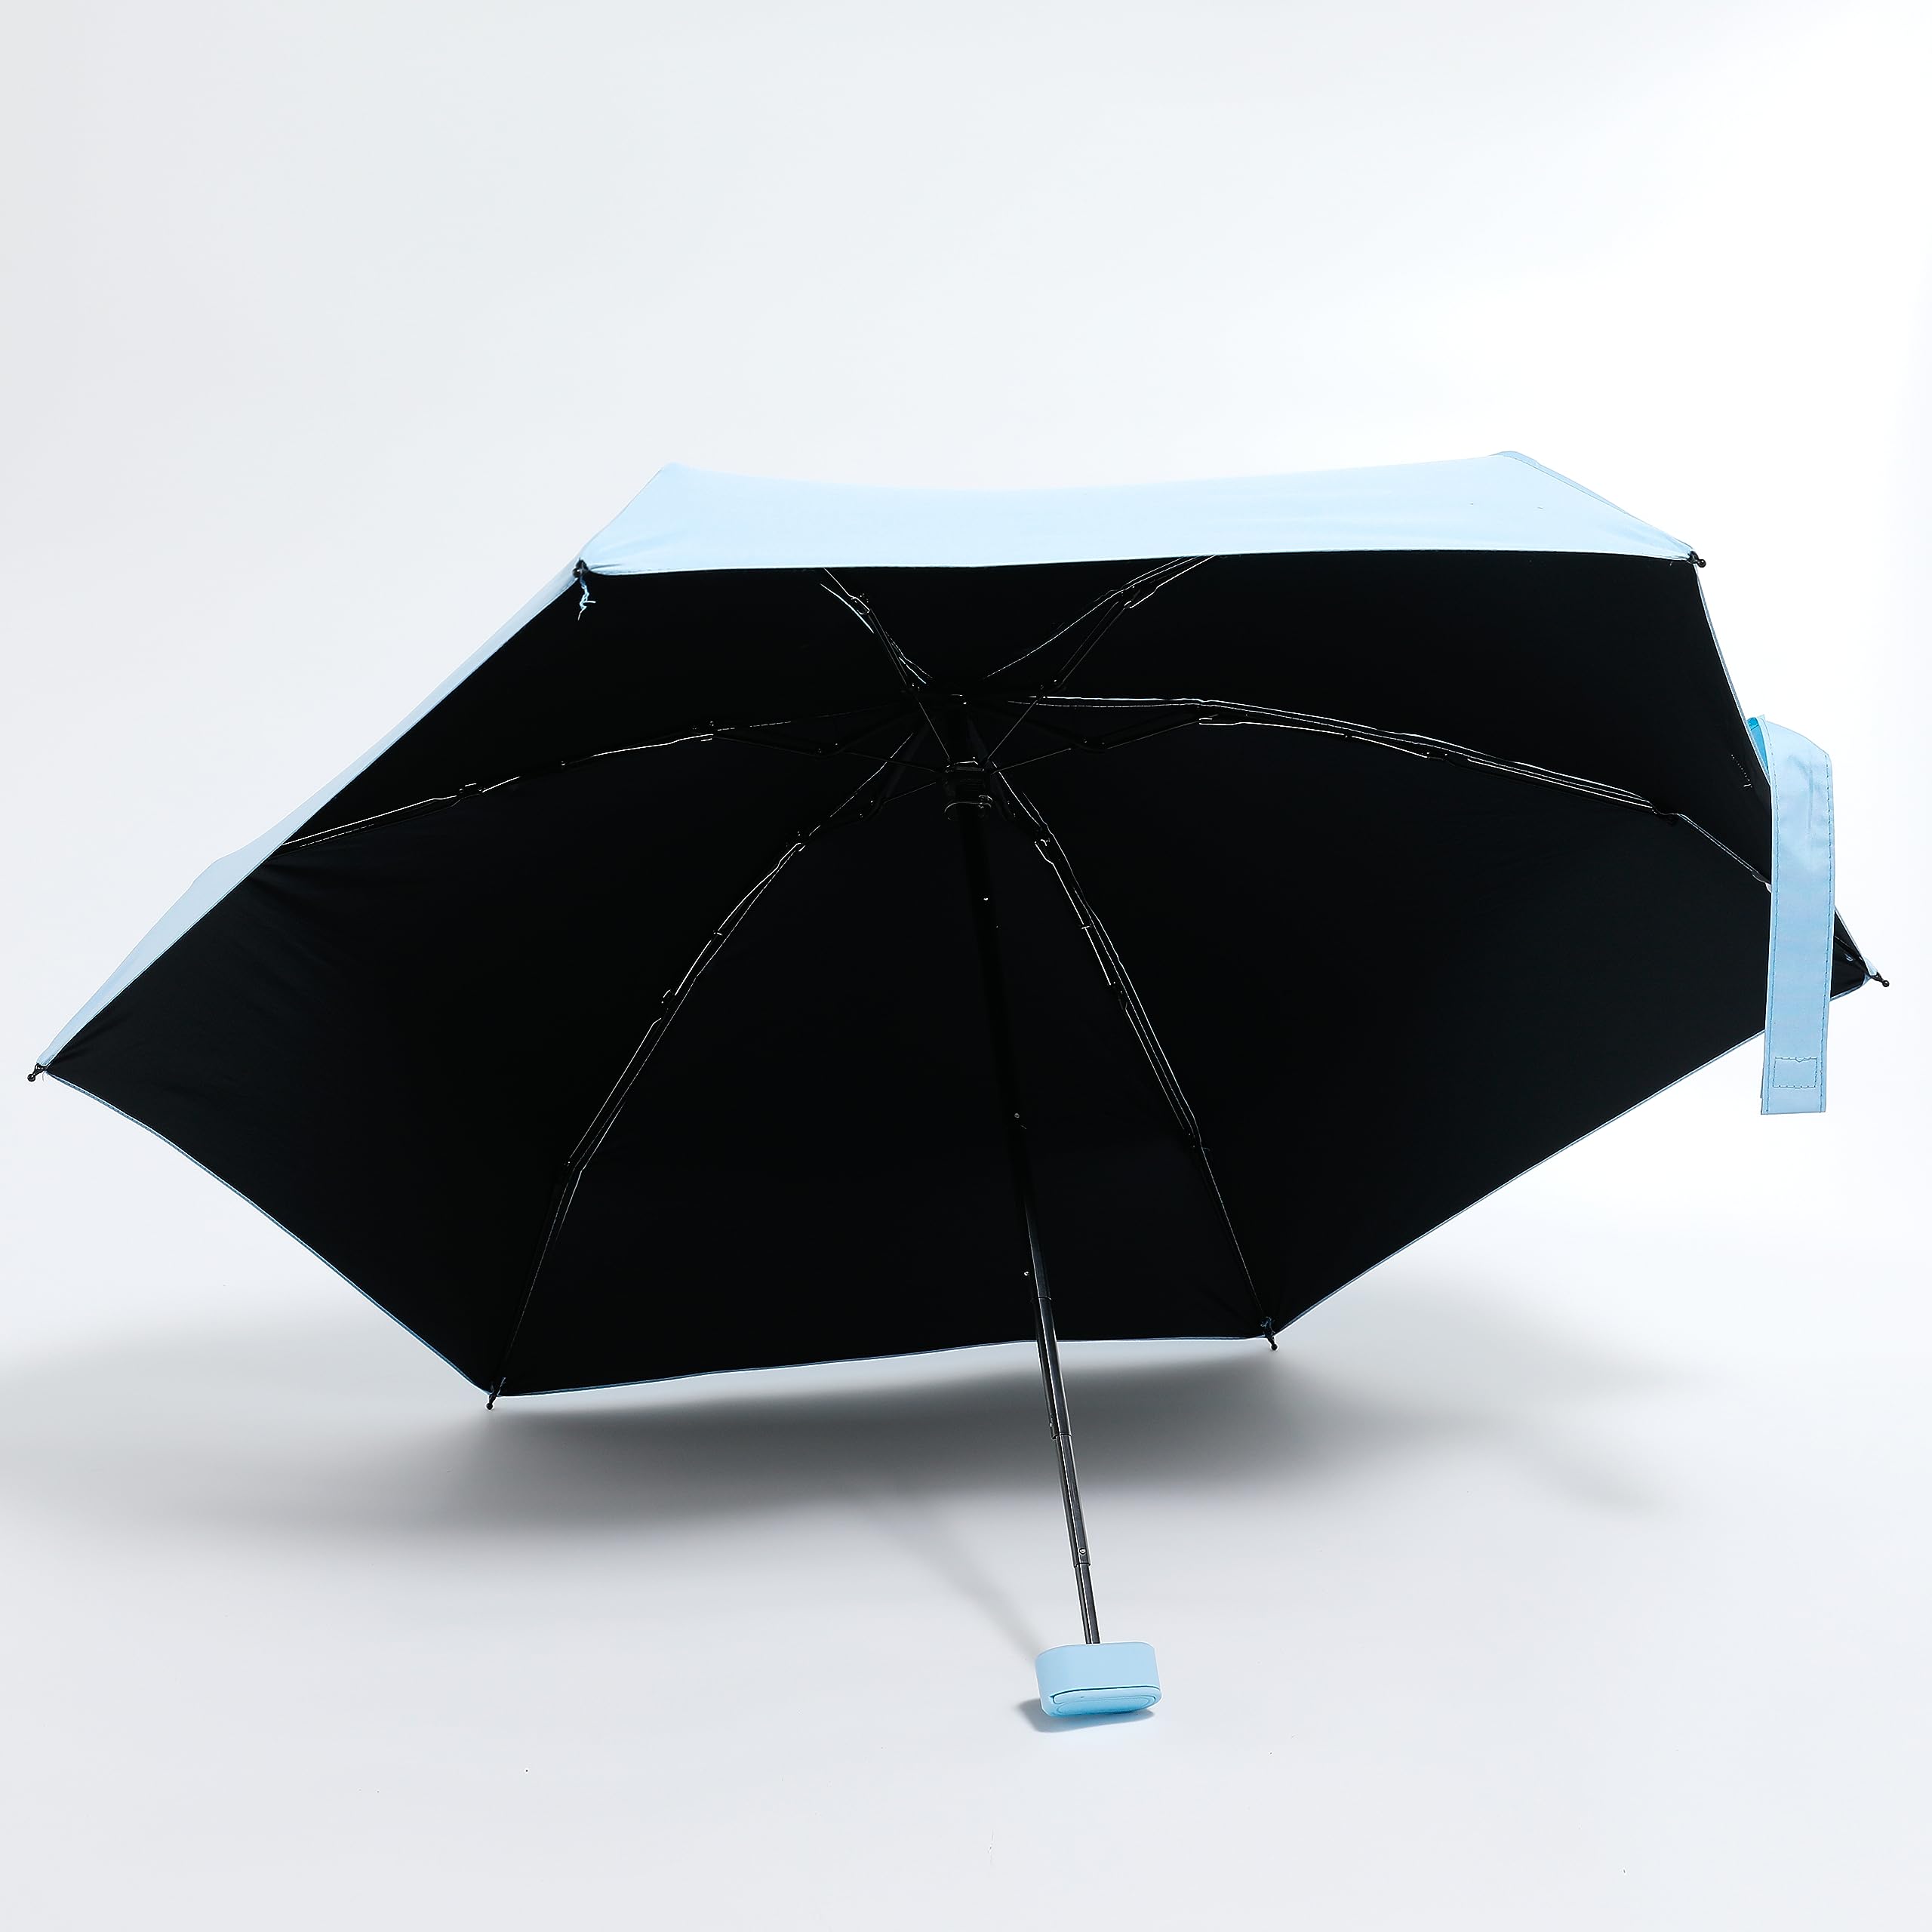 ABSORBIA 6K 6 fold Umbrella for Sun And Rain Protection, Lightweight Design, Compact & Portable, Outdoor, Fancy and Easy to Travel|Light Blue|Auto open |with black coating for UV protection